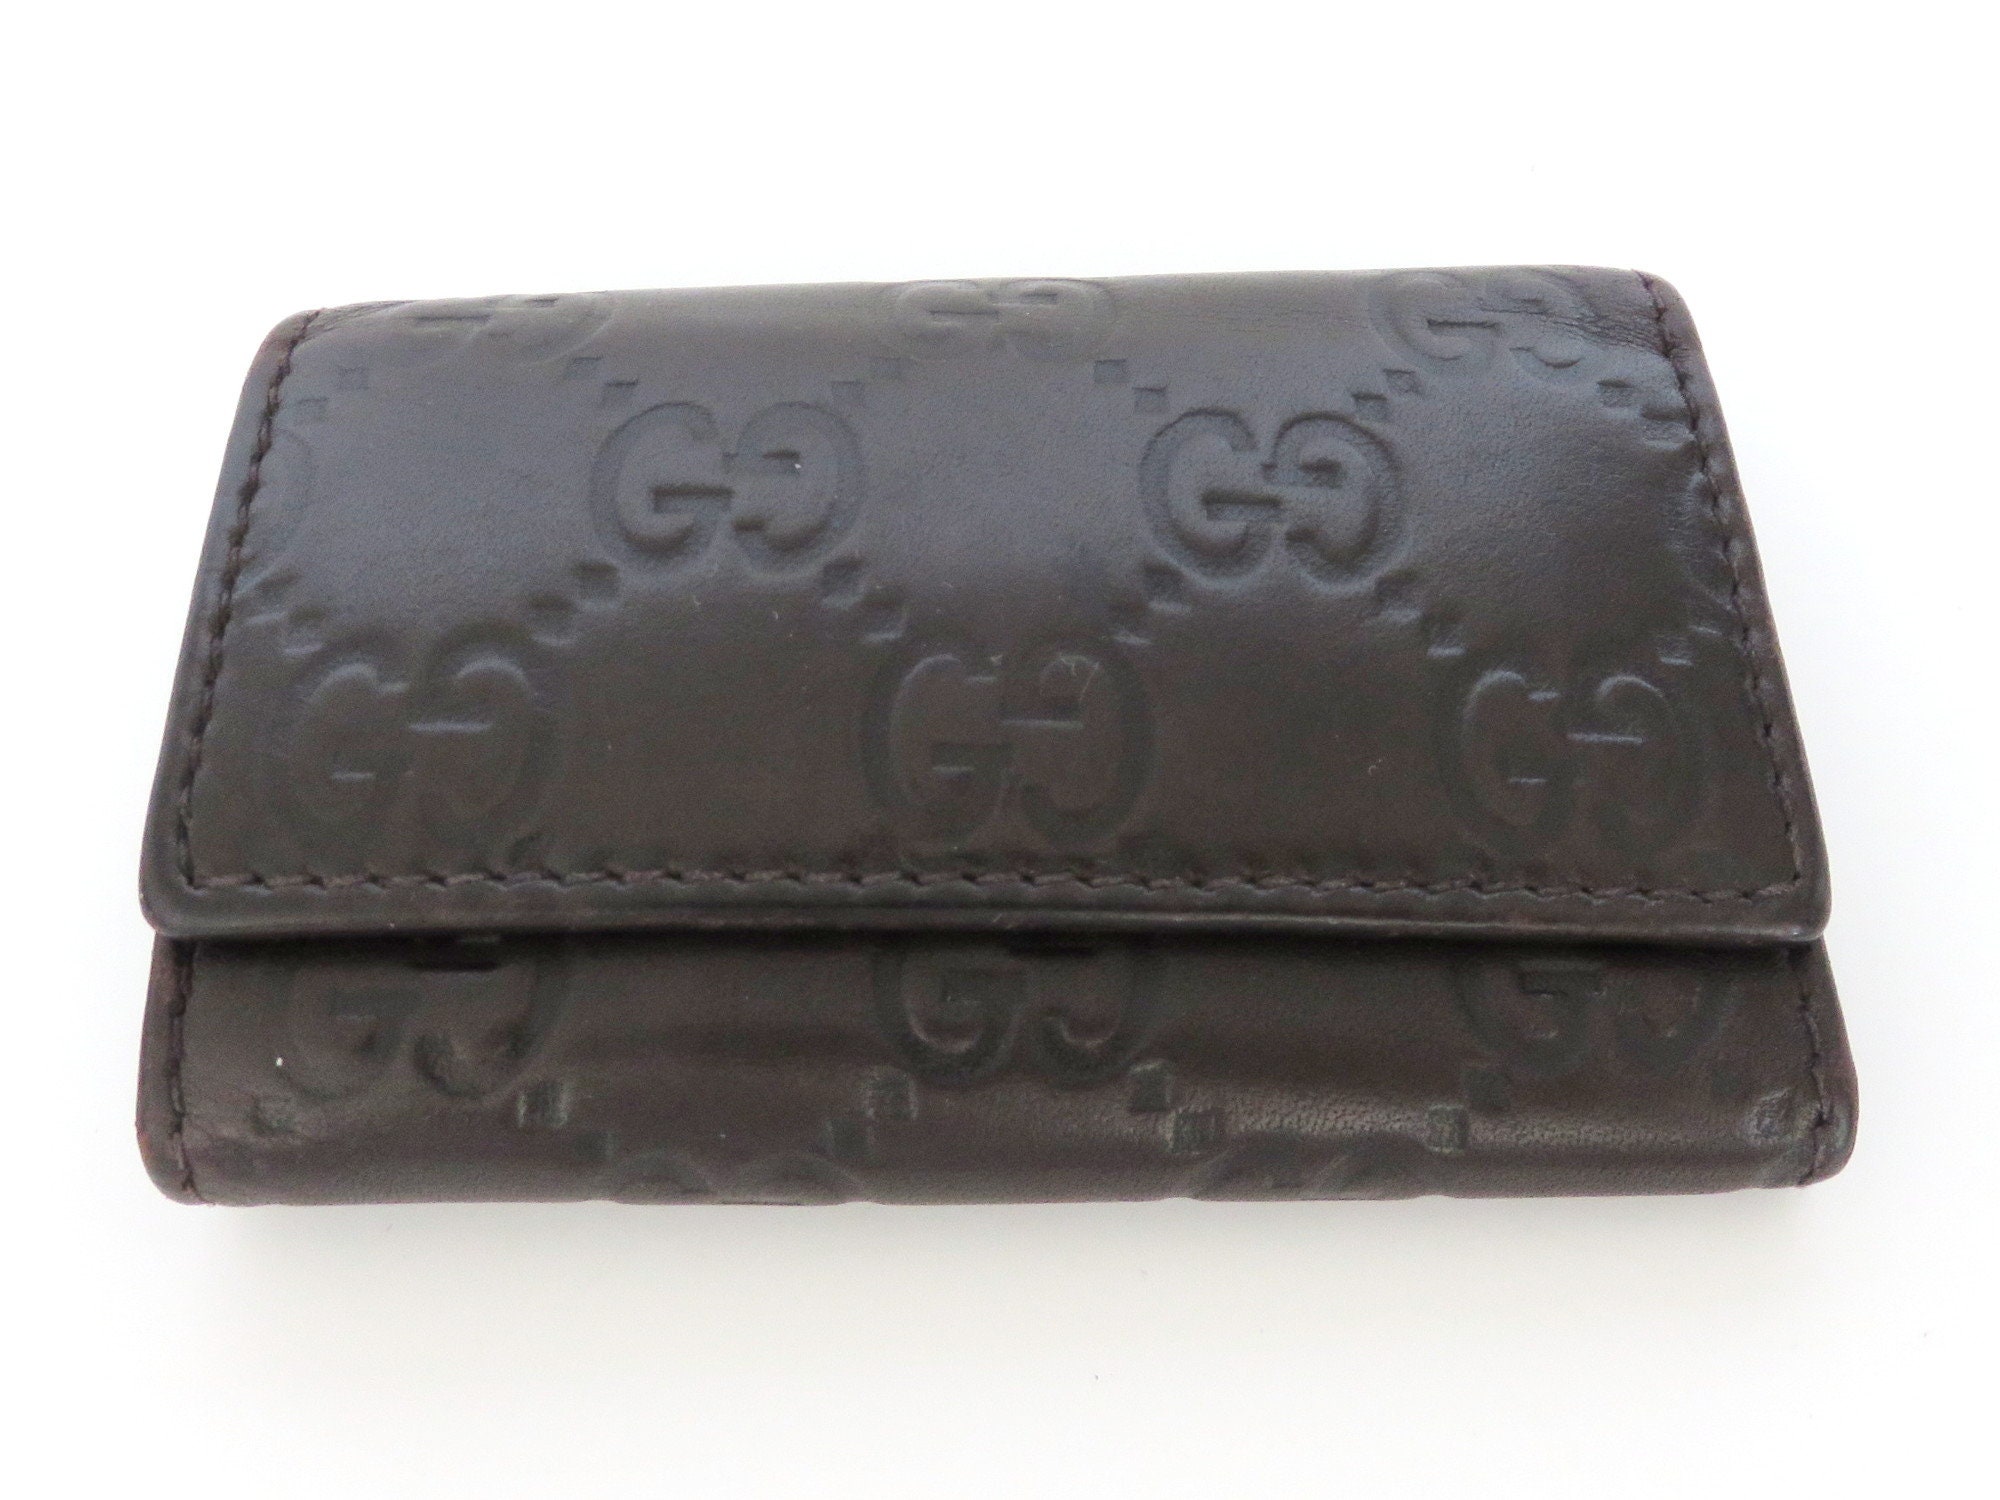 Gucci Guccissima Leather Key Holder Case Pouch Wallet